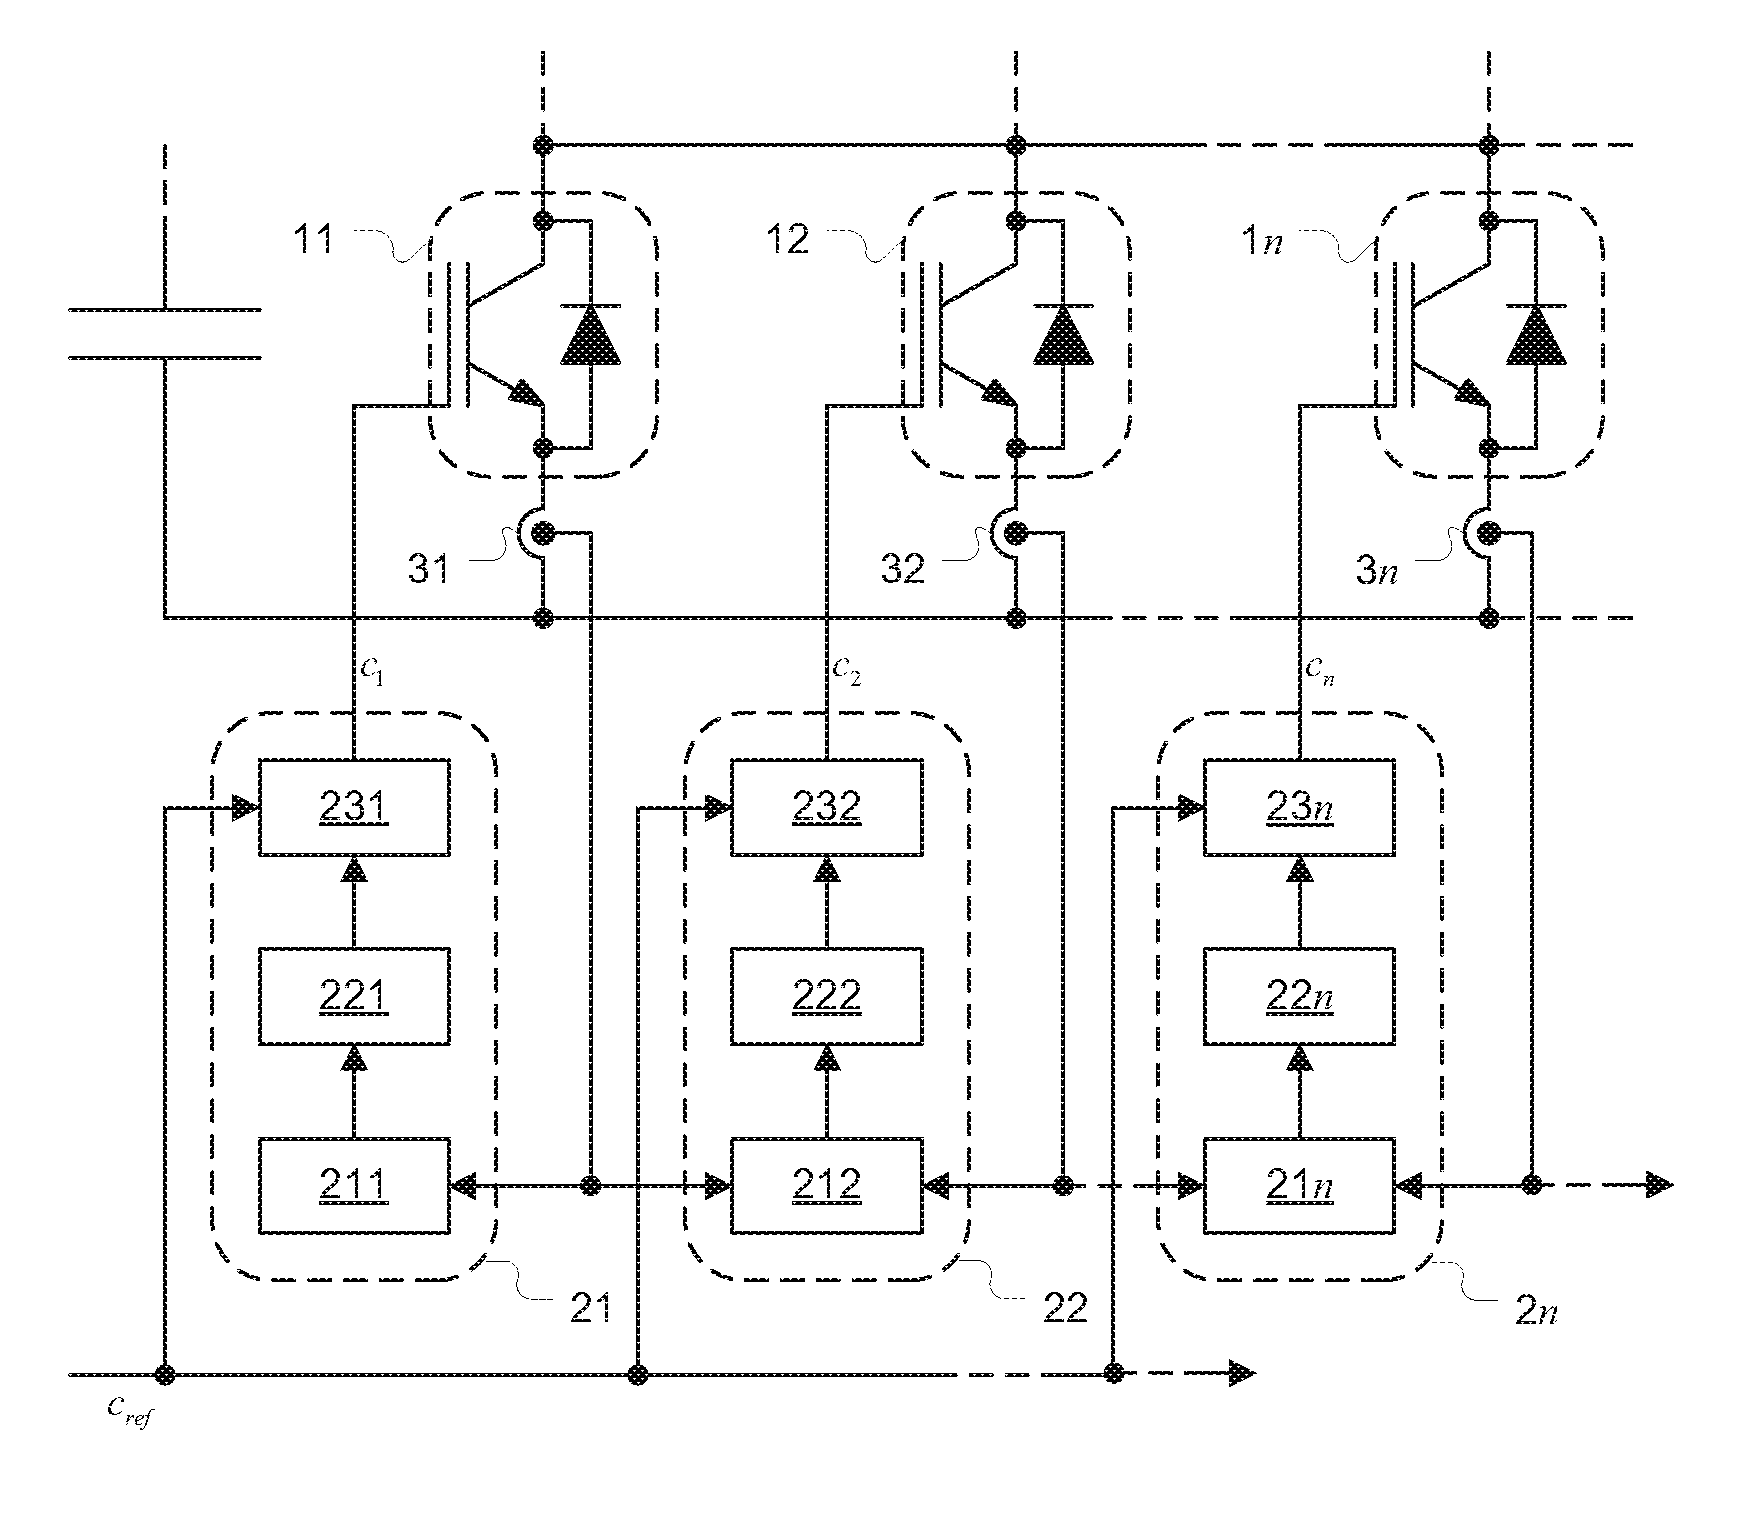 Gate driver unit for electrical switching device